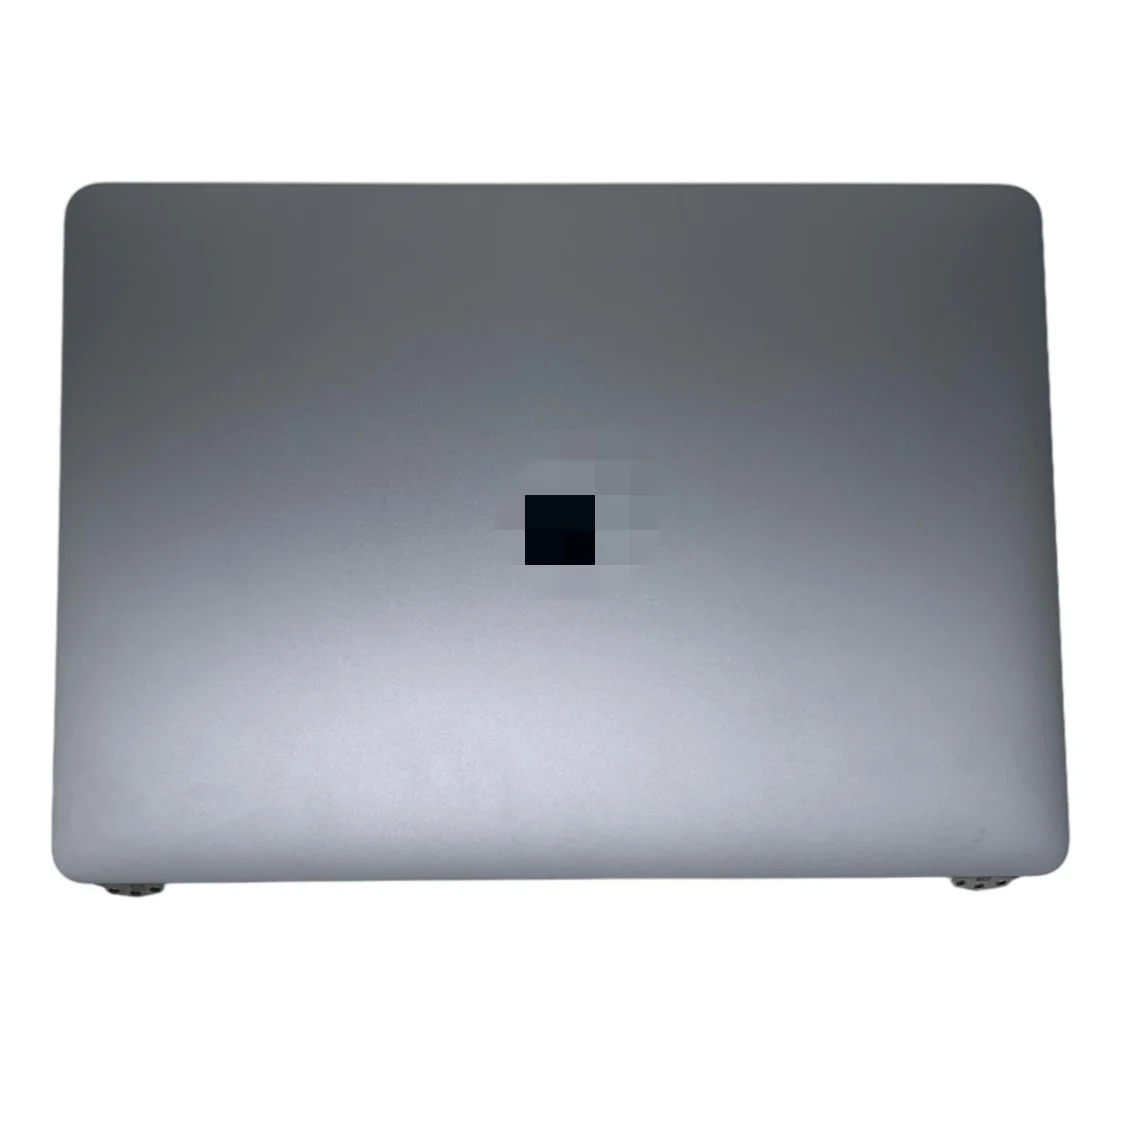 Rare New for Popular standard MacBook Pro Retina 13" Grey A1989 with Silver 2018